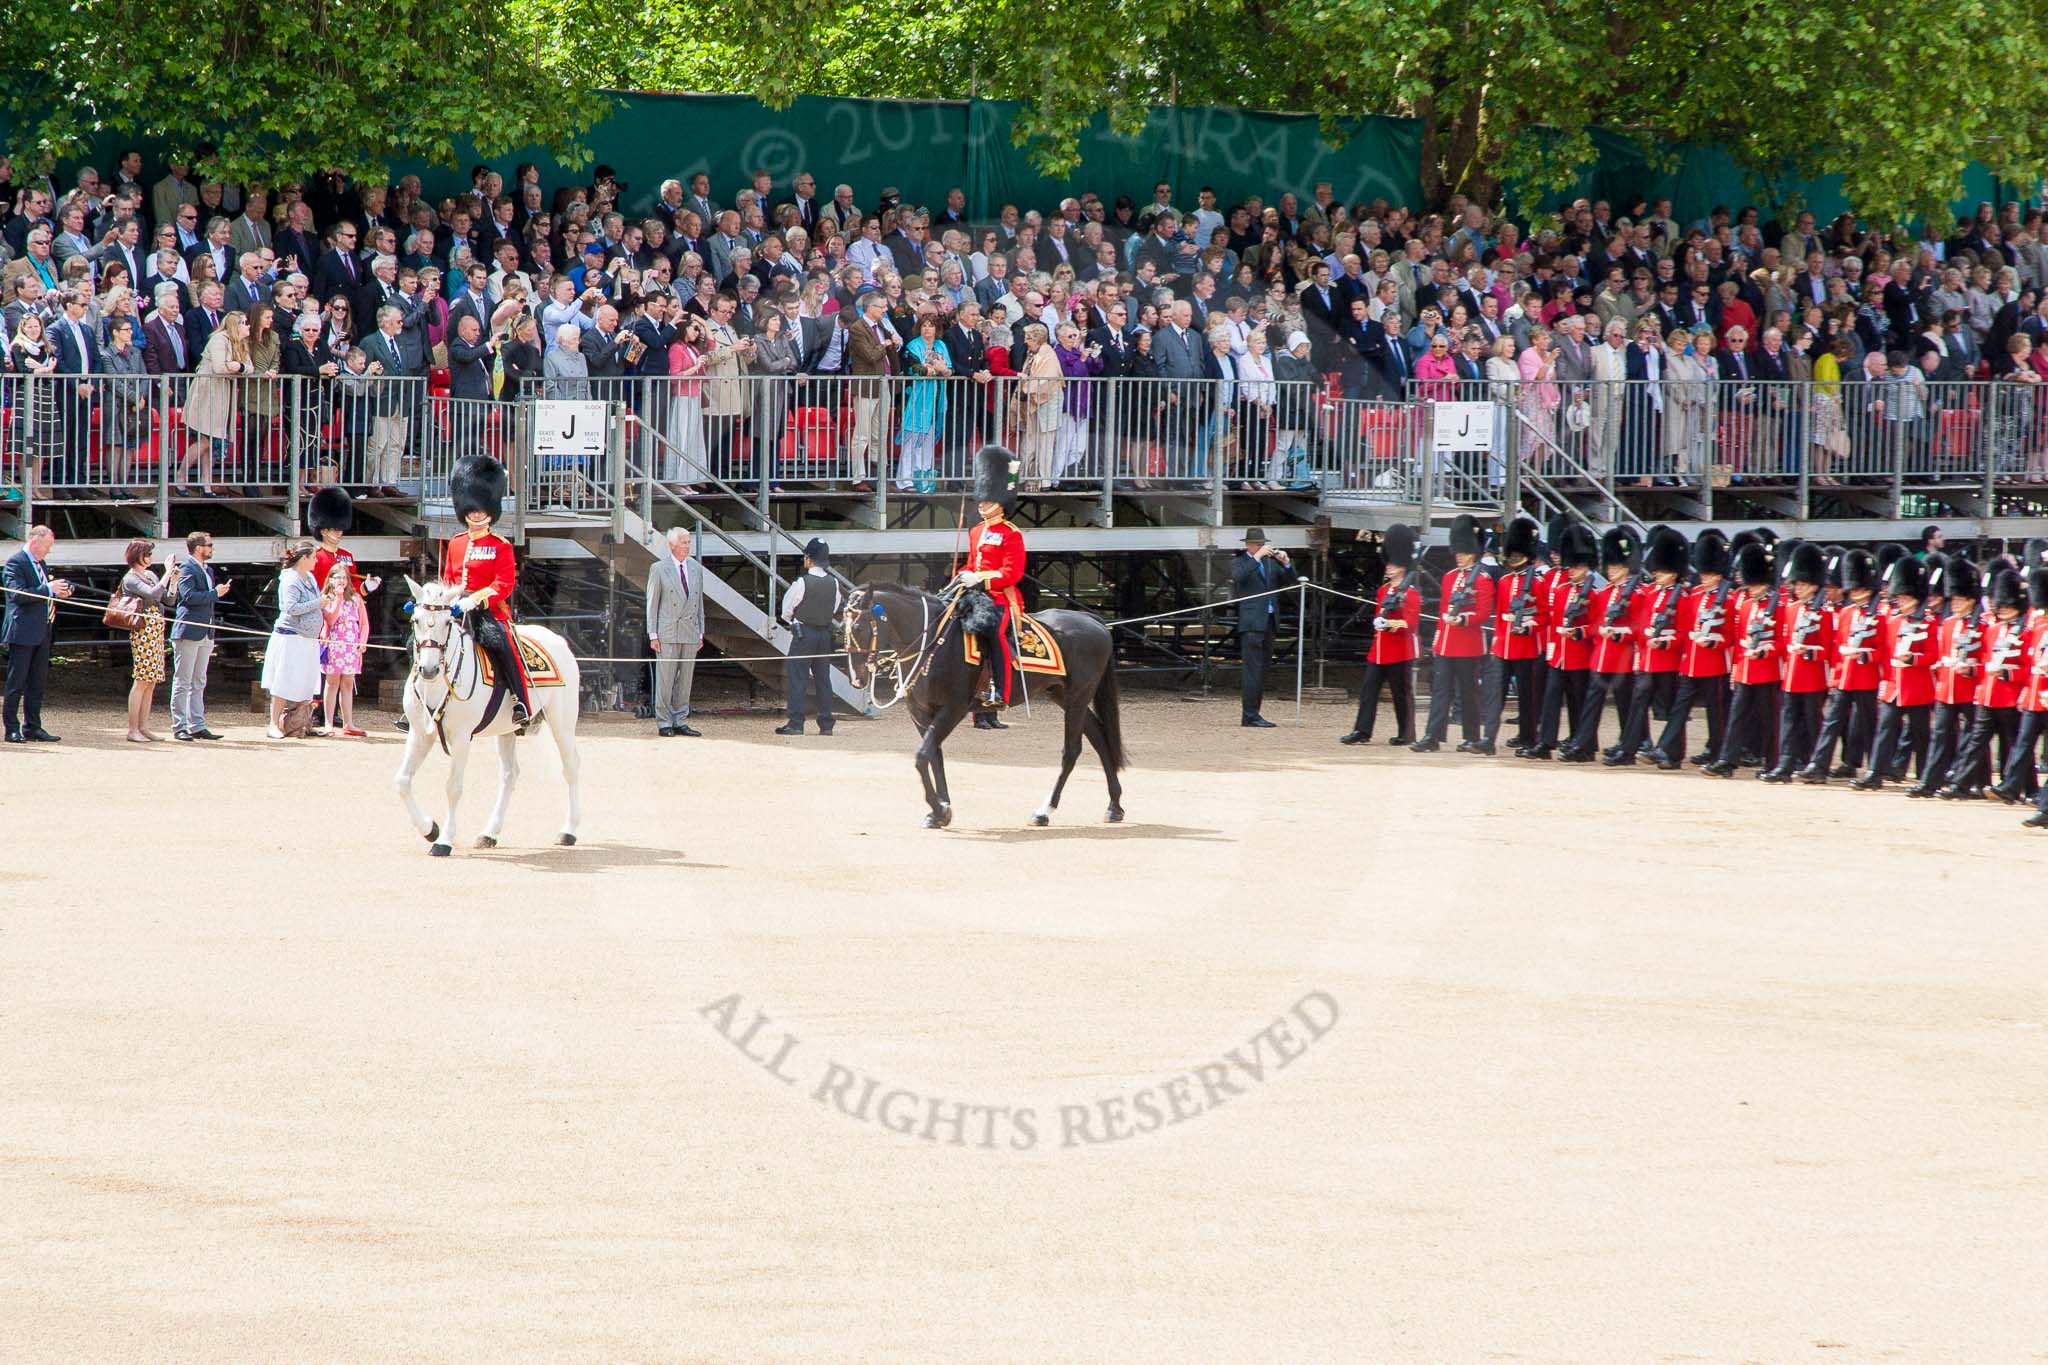 The Colonel's Review 2013: The Field Officer in Brigade Waiting, Lieutenant Colonel Dino Bossi, Welsh Guards, and the Major of the Parade, Major H G C Bettinson, Welsh Guards, leading the March Past..
Horse Guards Parade, Westminster,
London SW1,

United Kingdom,
on 08 June 2013 at 11:32, image #619